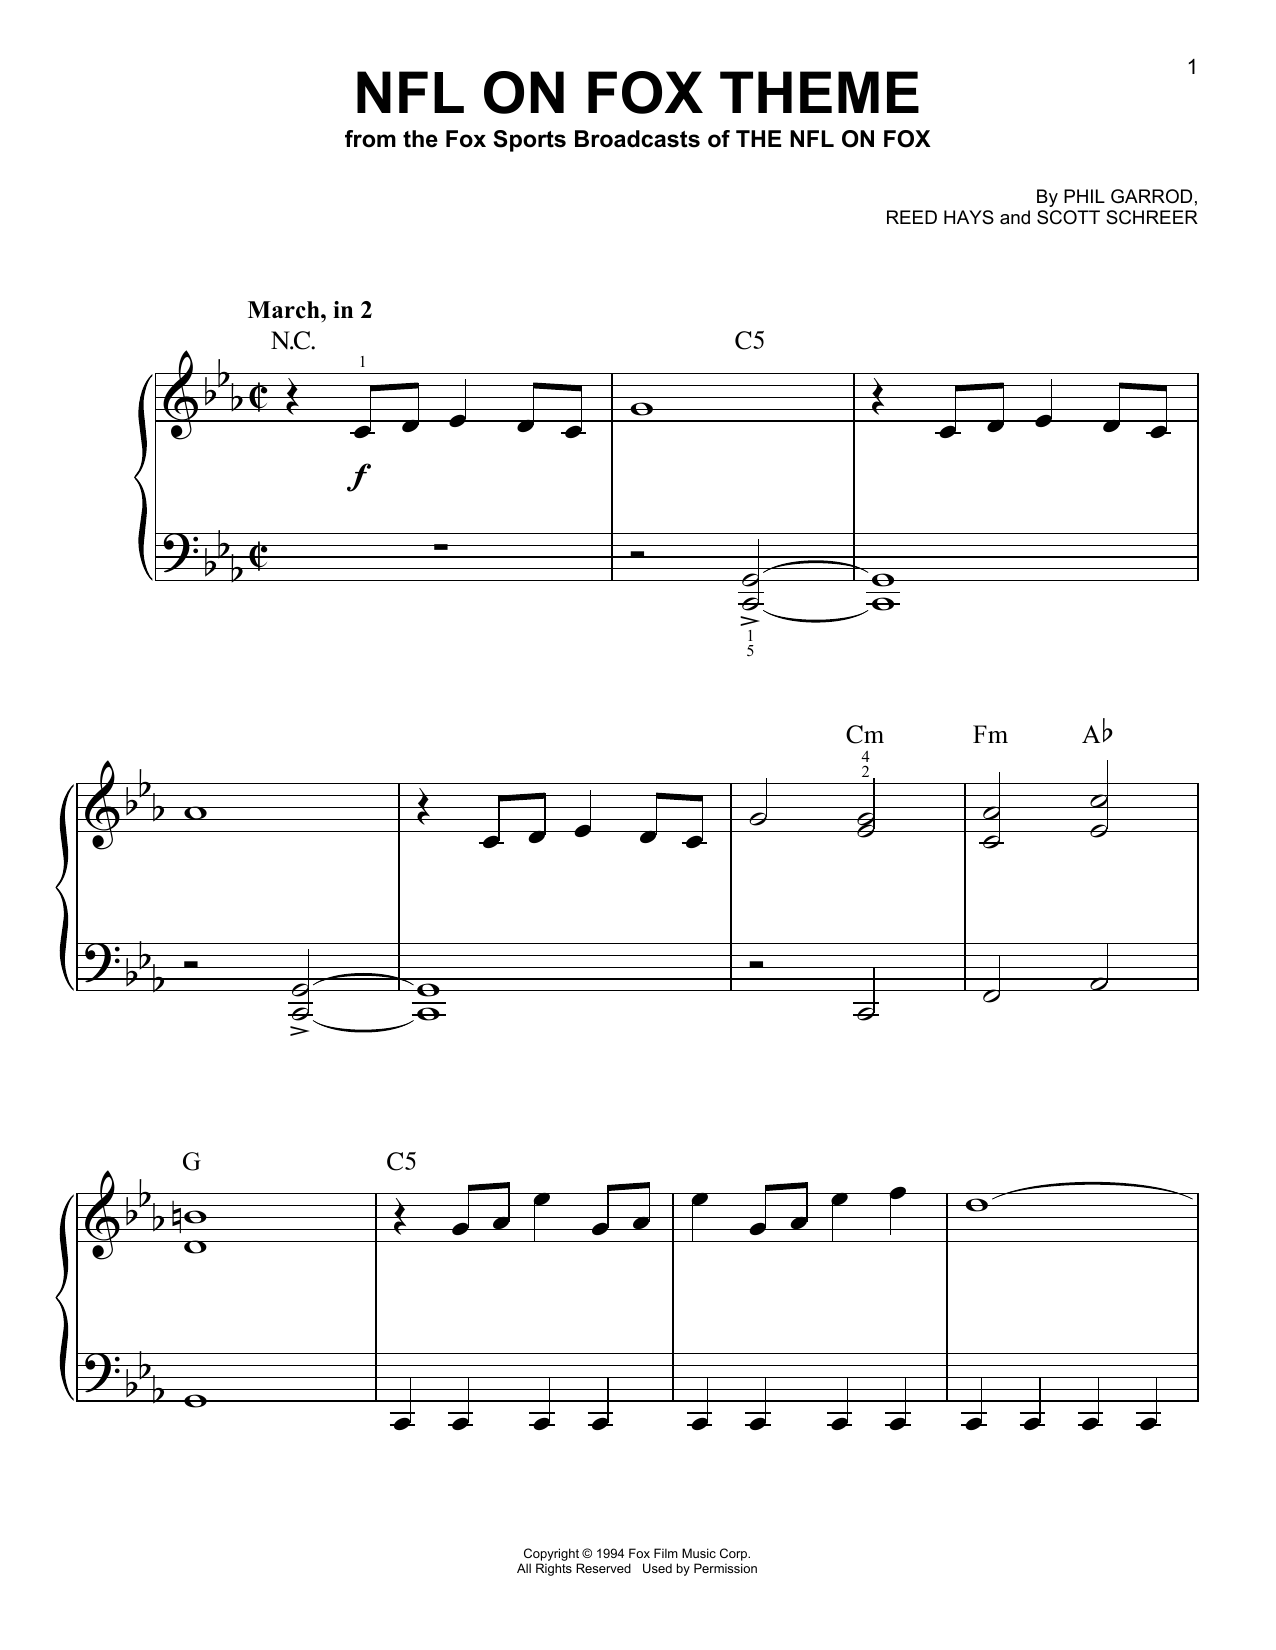 Download Phil Garrod, Reed Hayes and Scott Sc NFL On Fox Theme Sheet Music